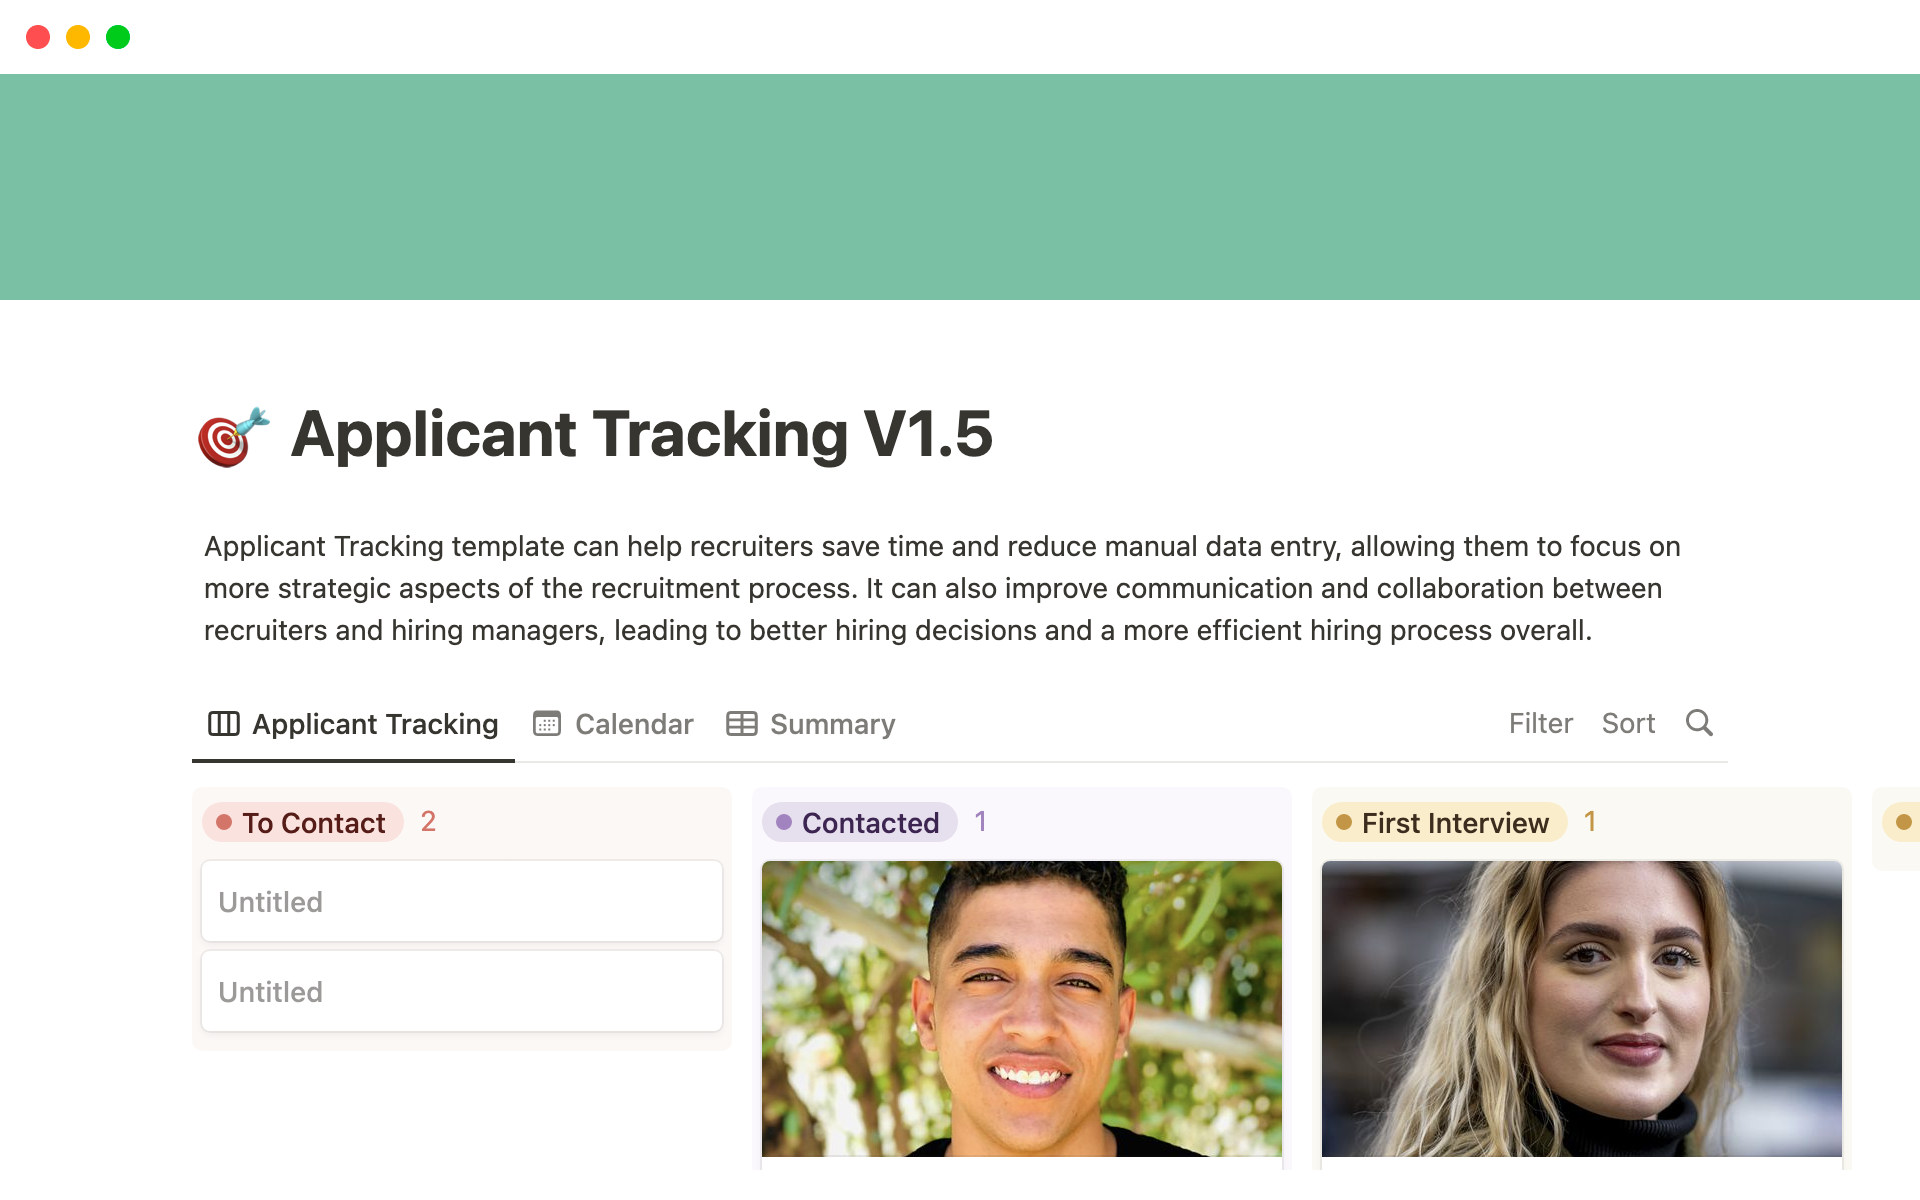 Applicant Tracking template can help recruiters save time and reduce manual data entry